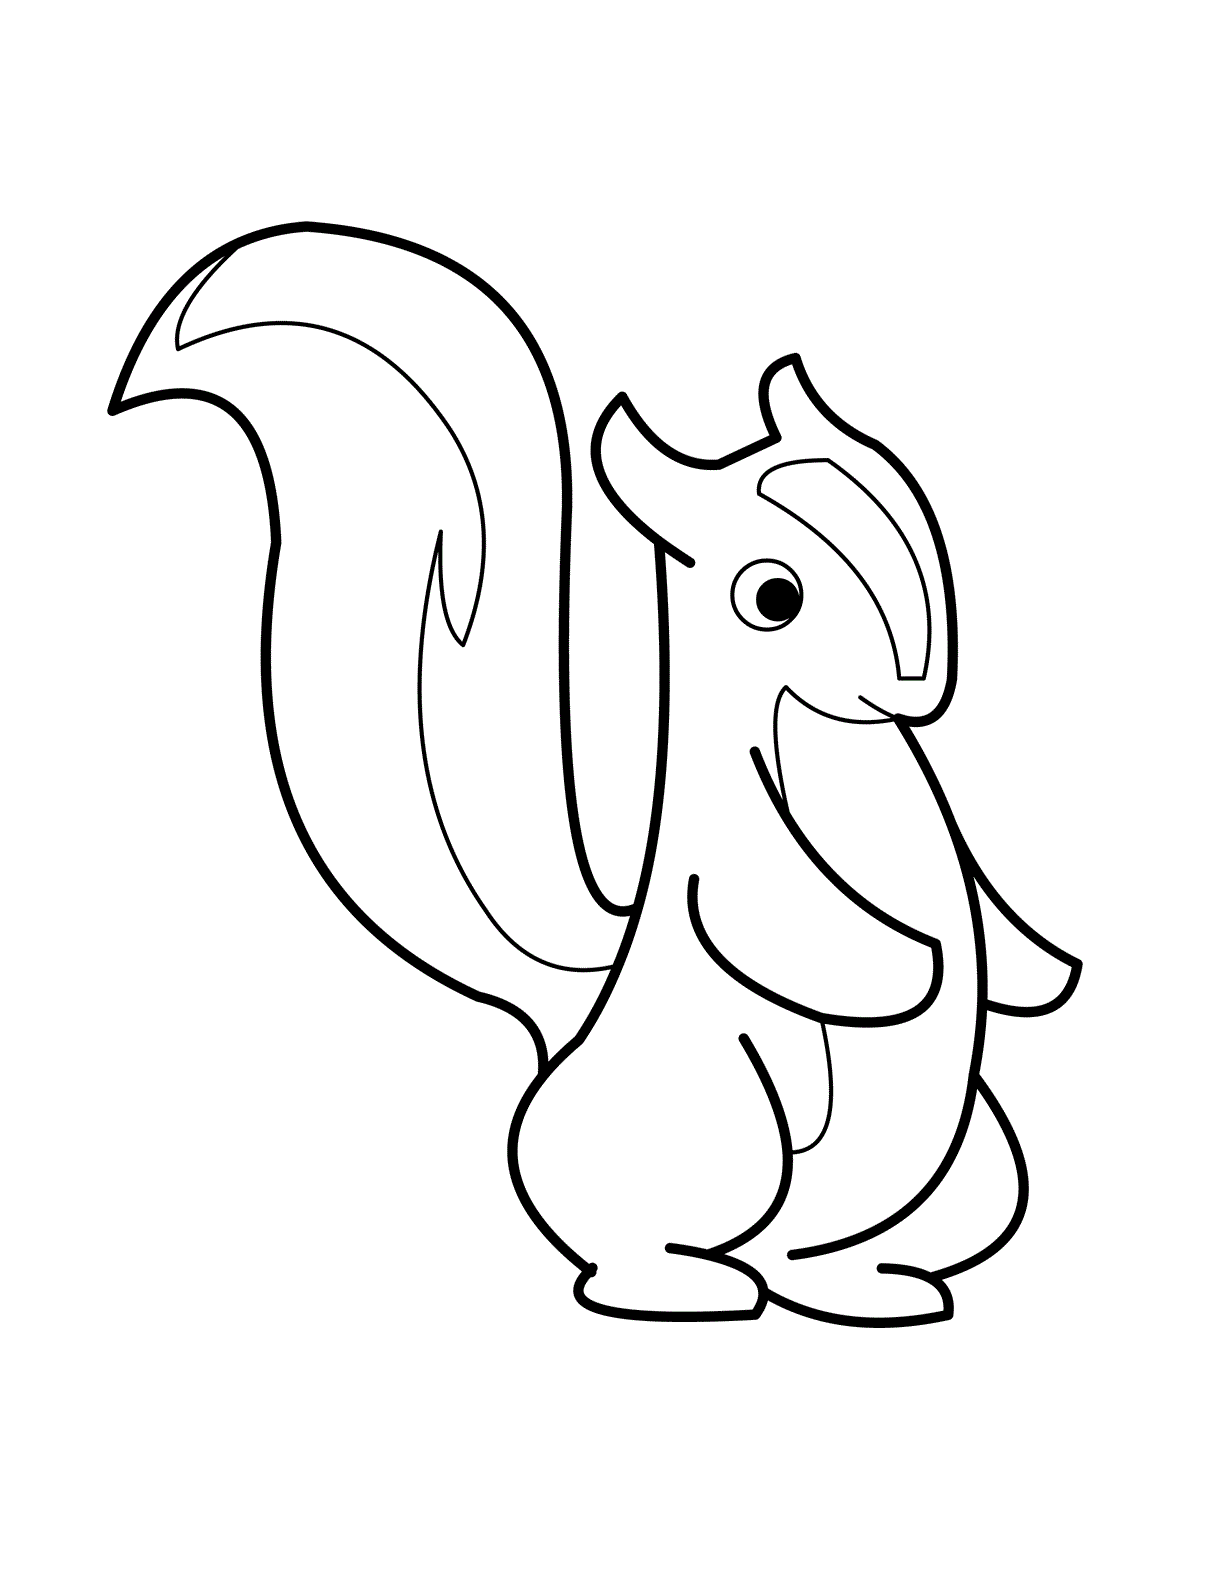 Mammals Skunks coloring page for kidsFree coloring pages for kids 